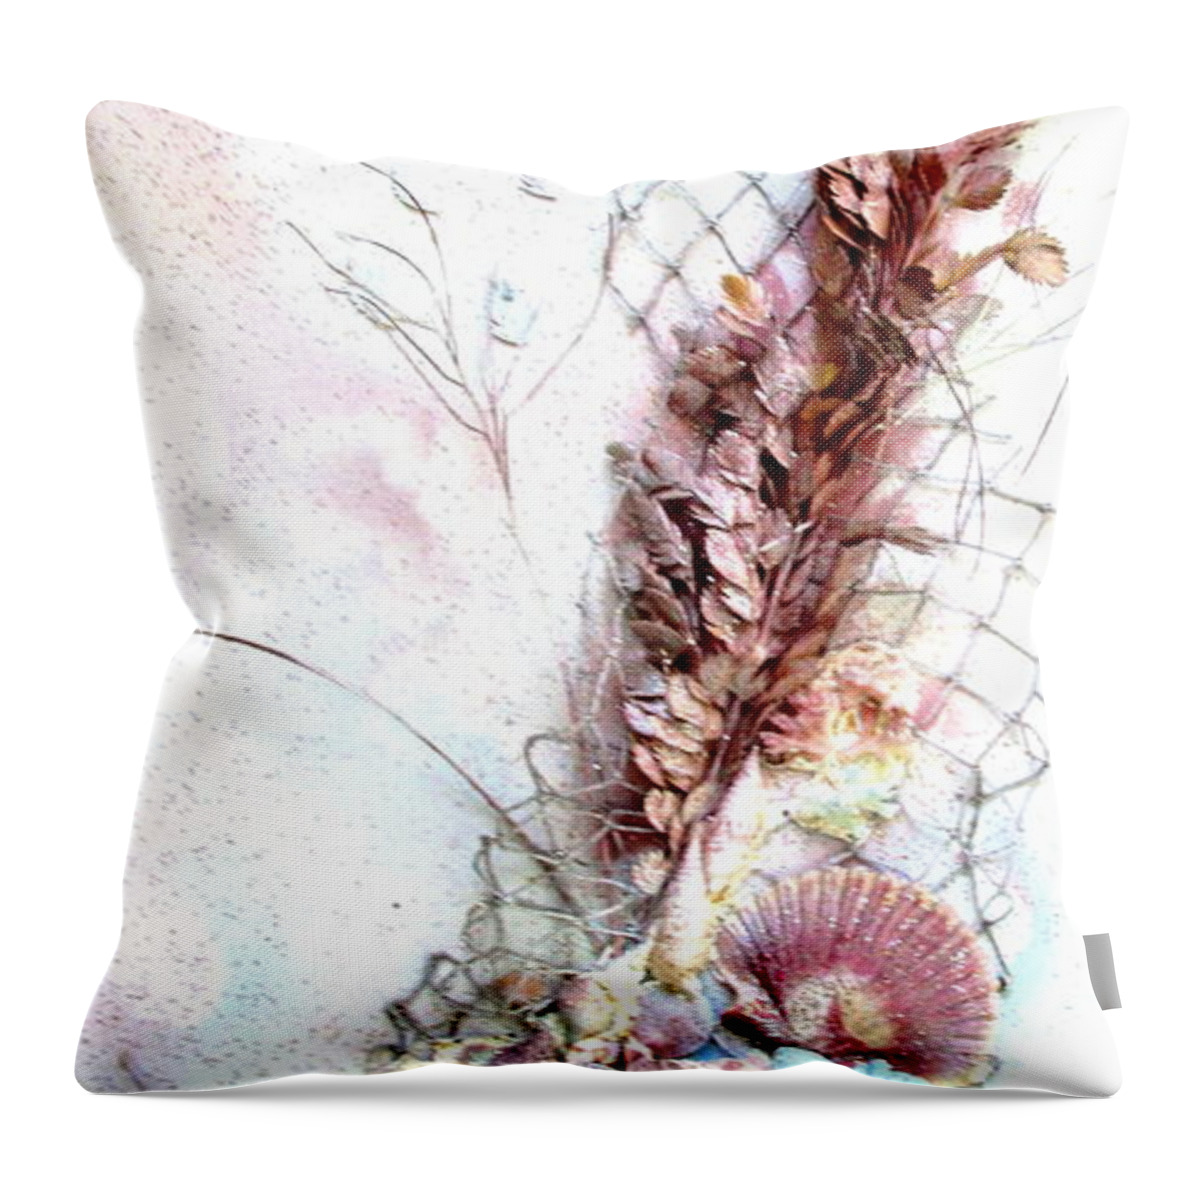 Print Throw Pillow featuring the mixed media Starfish Is The Star by Ashley Goforth